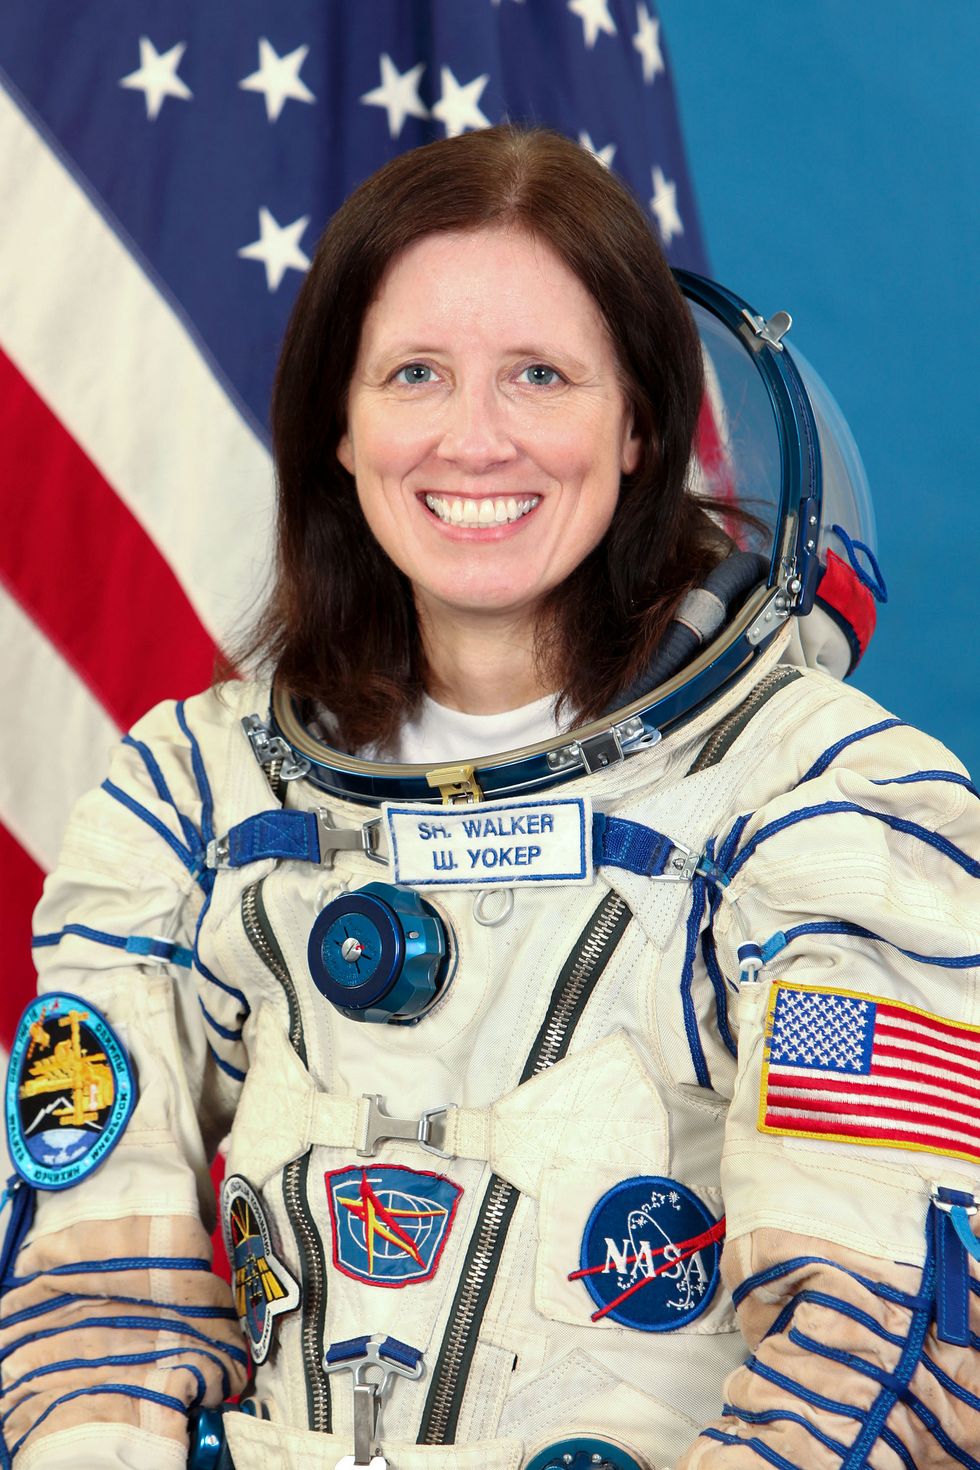 Smile, Uniform, Tooth, Electric blue, Space, Flag of the united states, Astronaut, Award, Pleased, Laugh, 